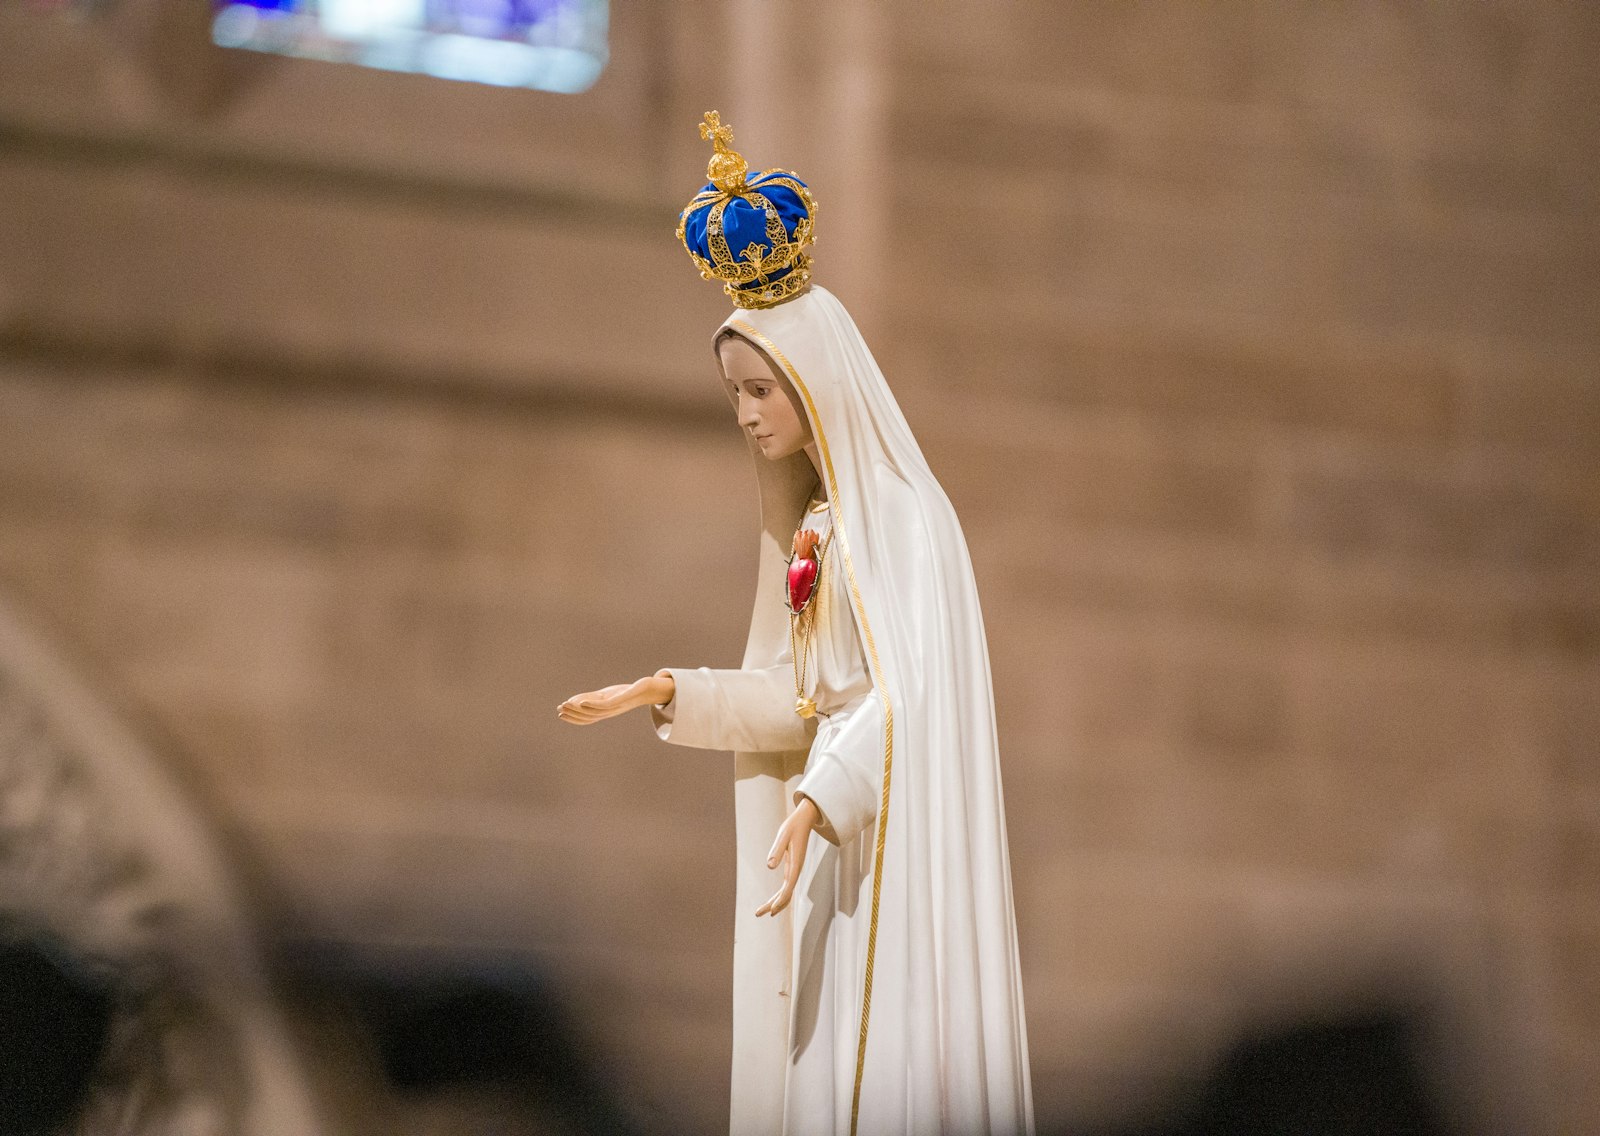 Pope Francis encouraged bishops from around the world to join him in prayer March 25, as the Holy Father led a consecration from St. Peter's Basilica. Pictured is a statue of the Blessed Virgin Mary, on loan to the cathedral from the Our Lady of Fatima Shrine in Riverview.